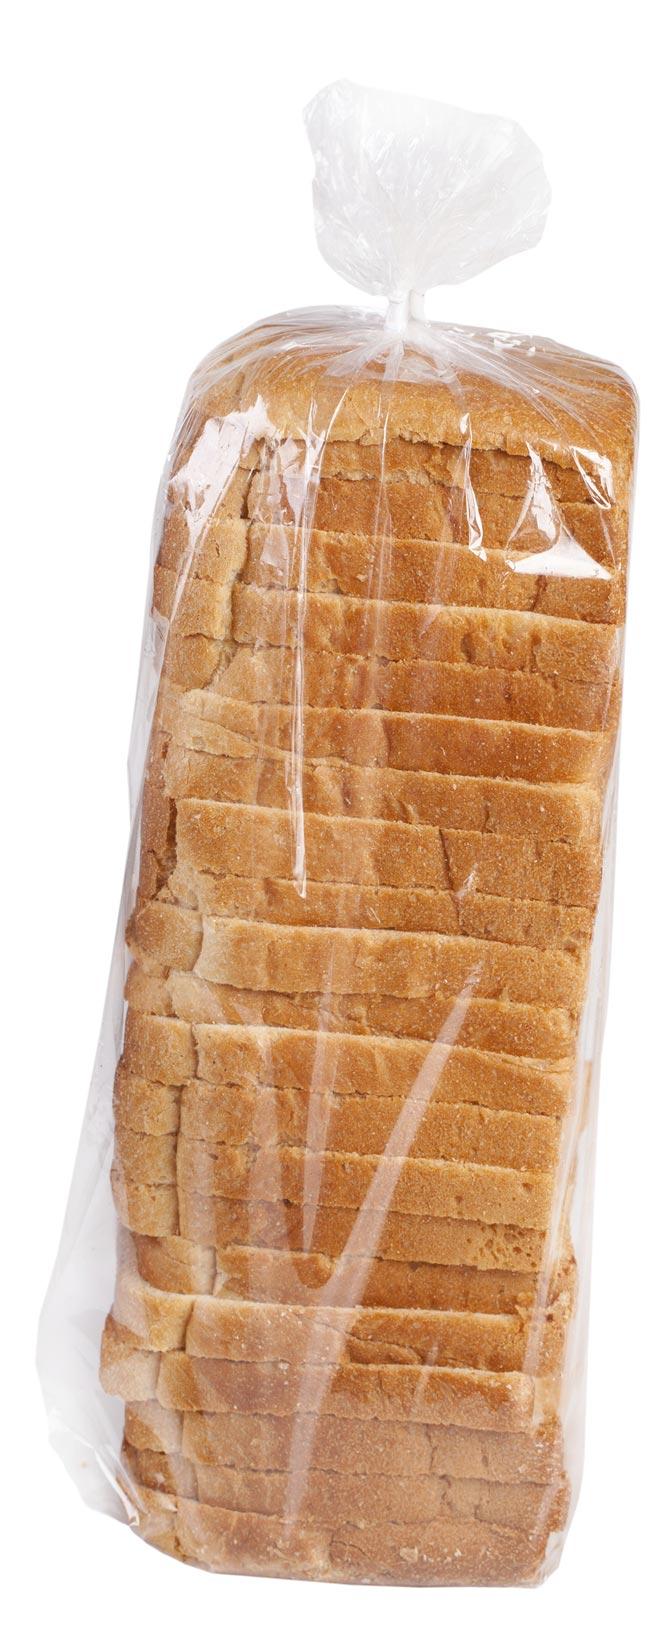 Commercially available breads contain hazardous chemicals: CSE